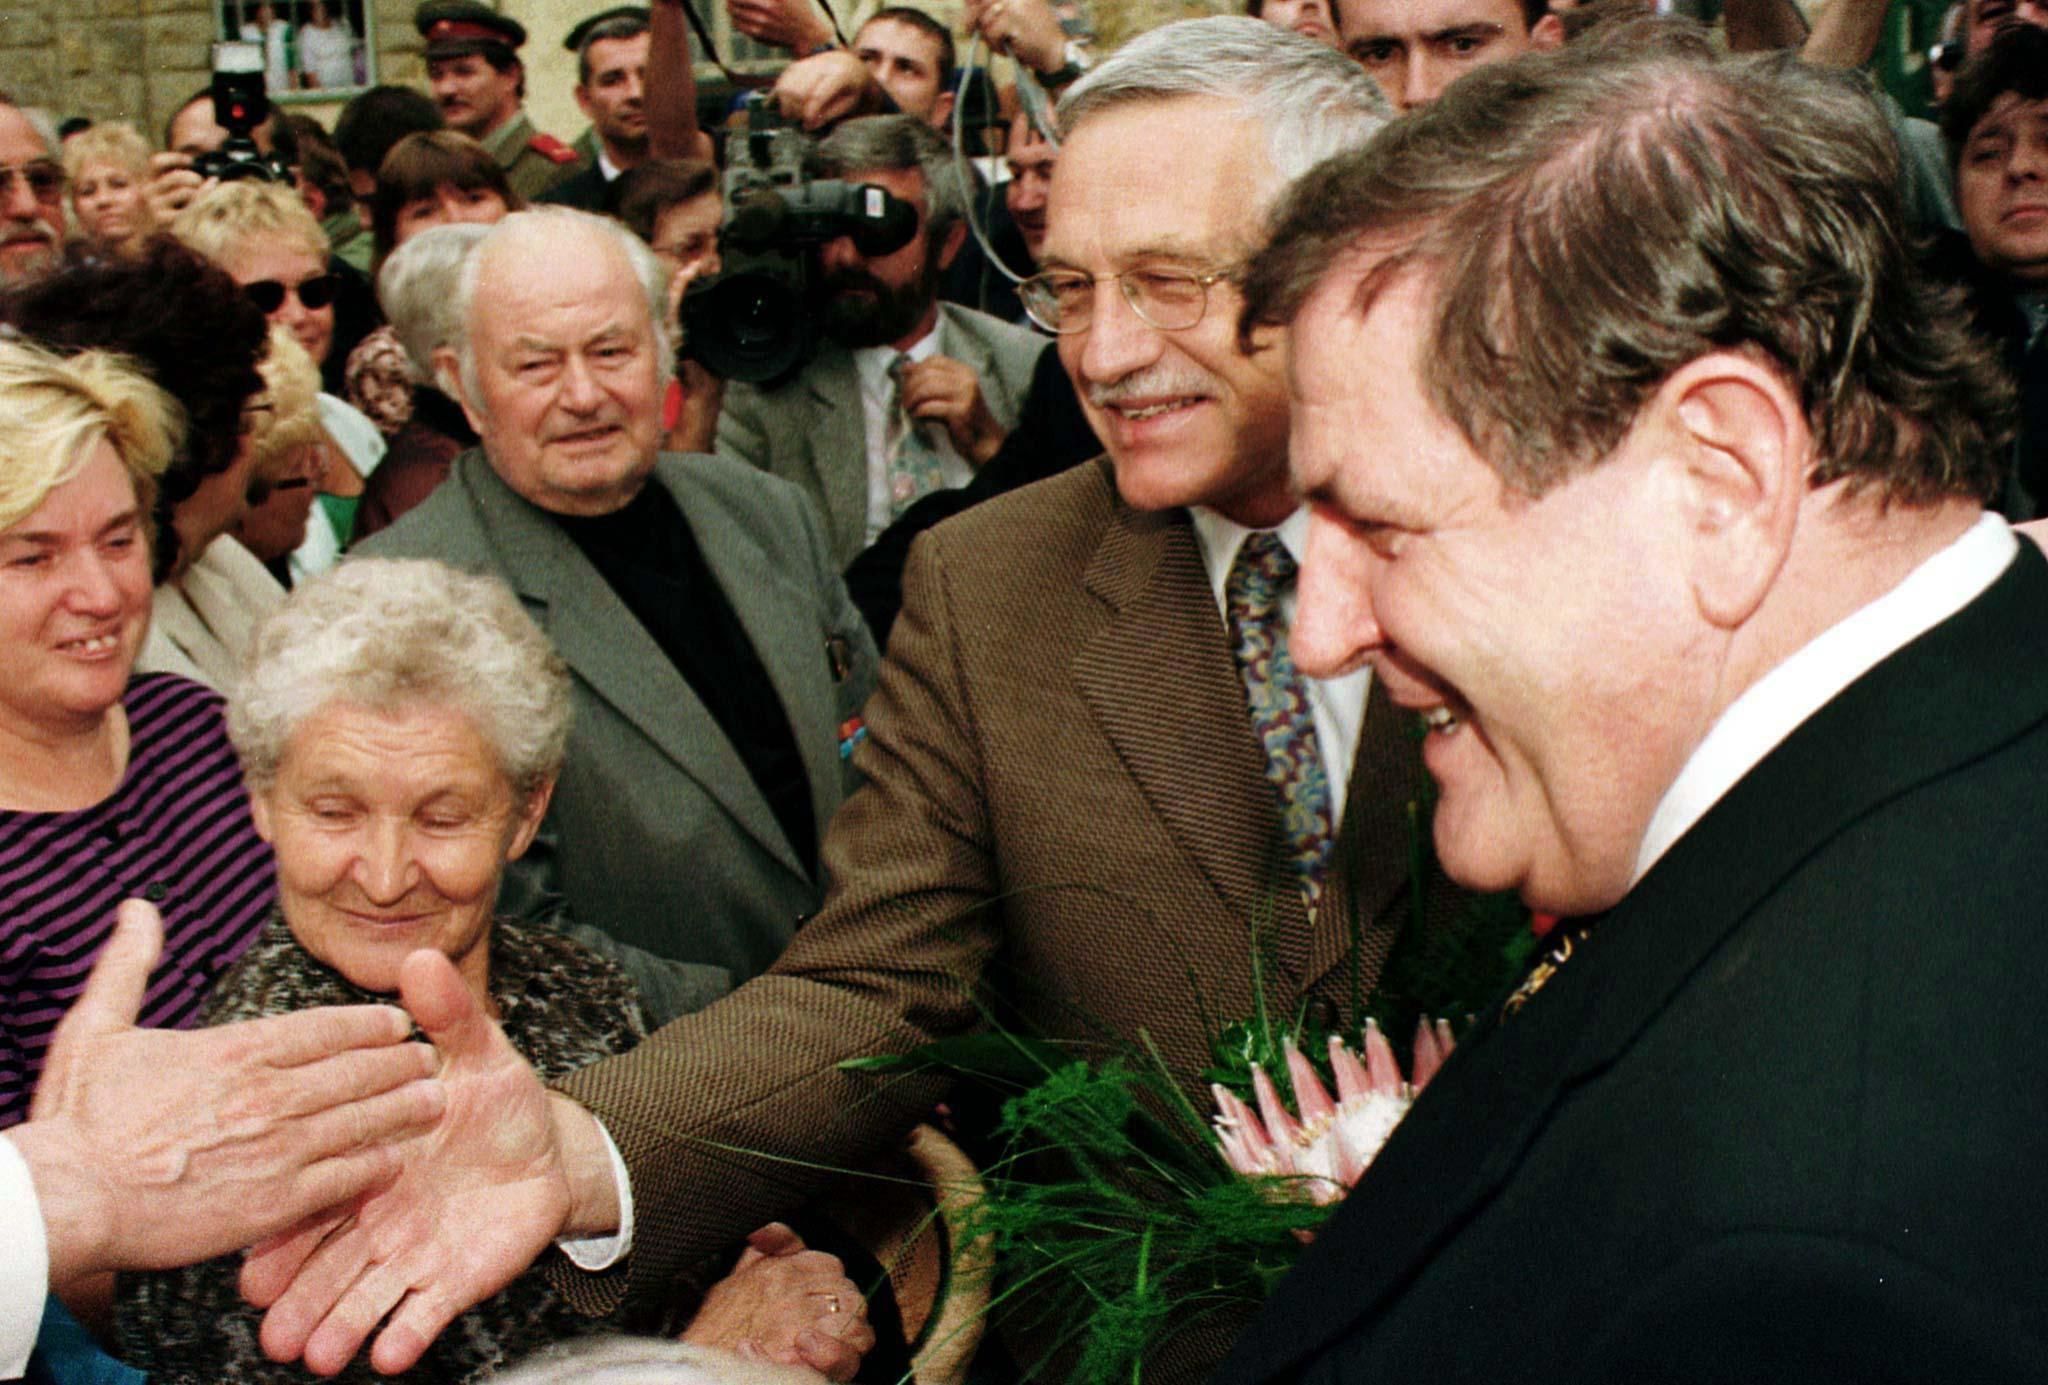 Czech Prime Minister Vaclav Klaus and his Slovak counterpart Vladimir Meciar greeted by a crowd in 1993.